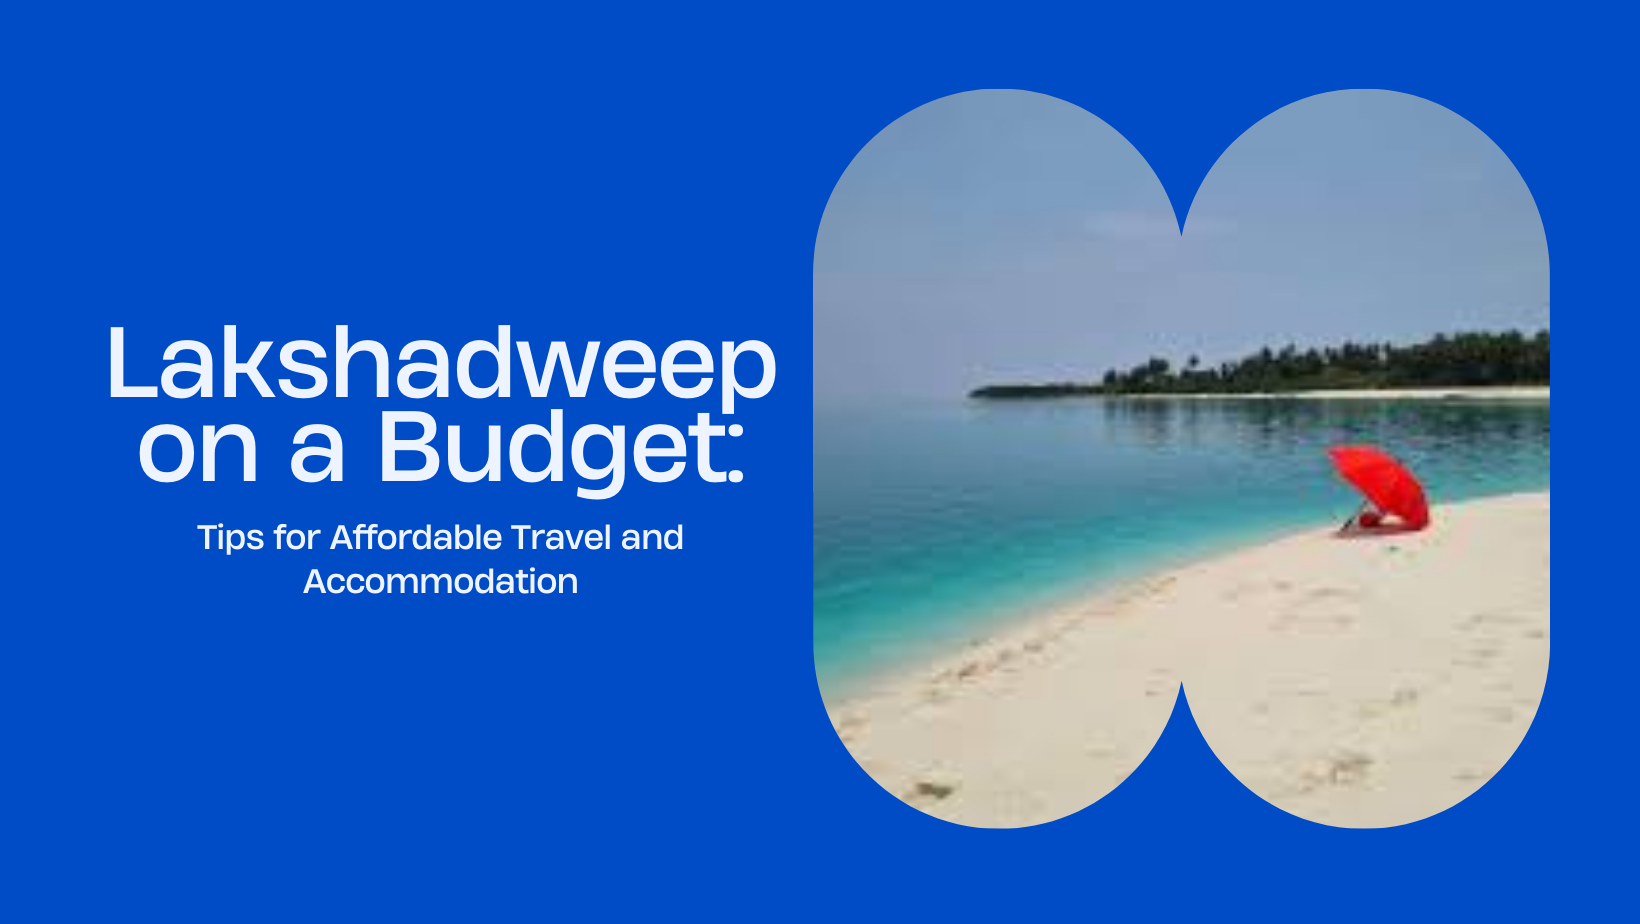 Lakshadweep tourist places Affordable Travel and Accommodation